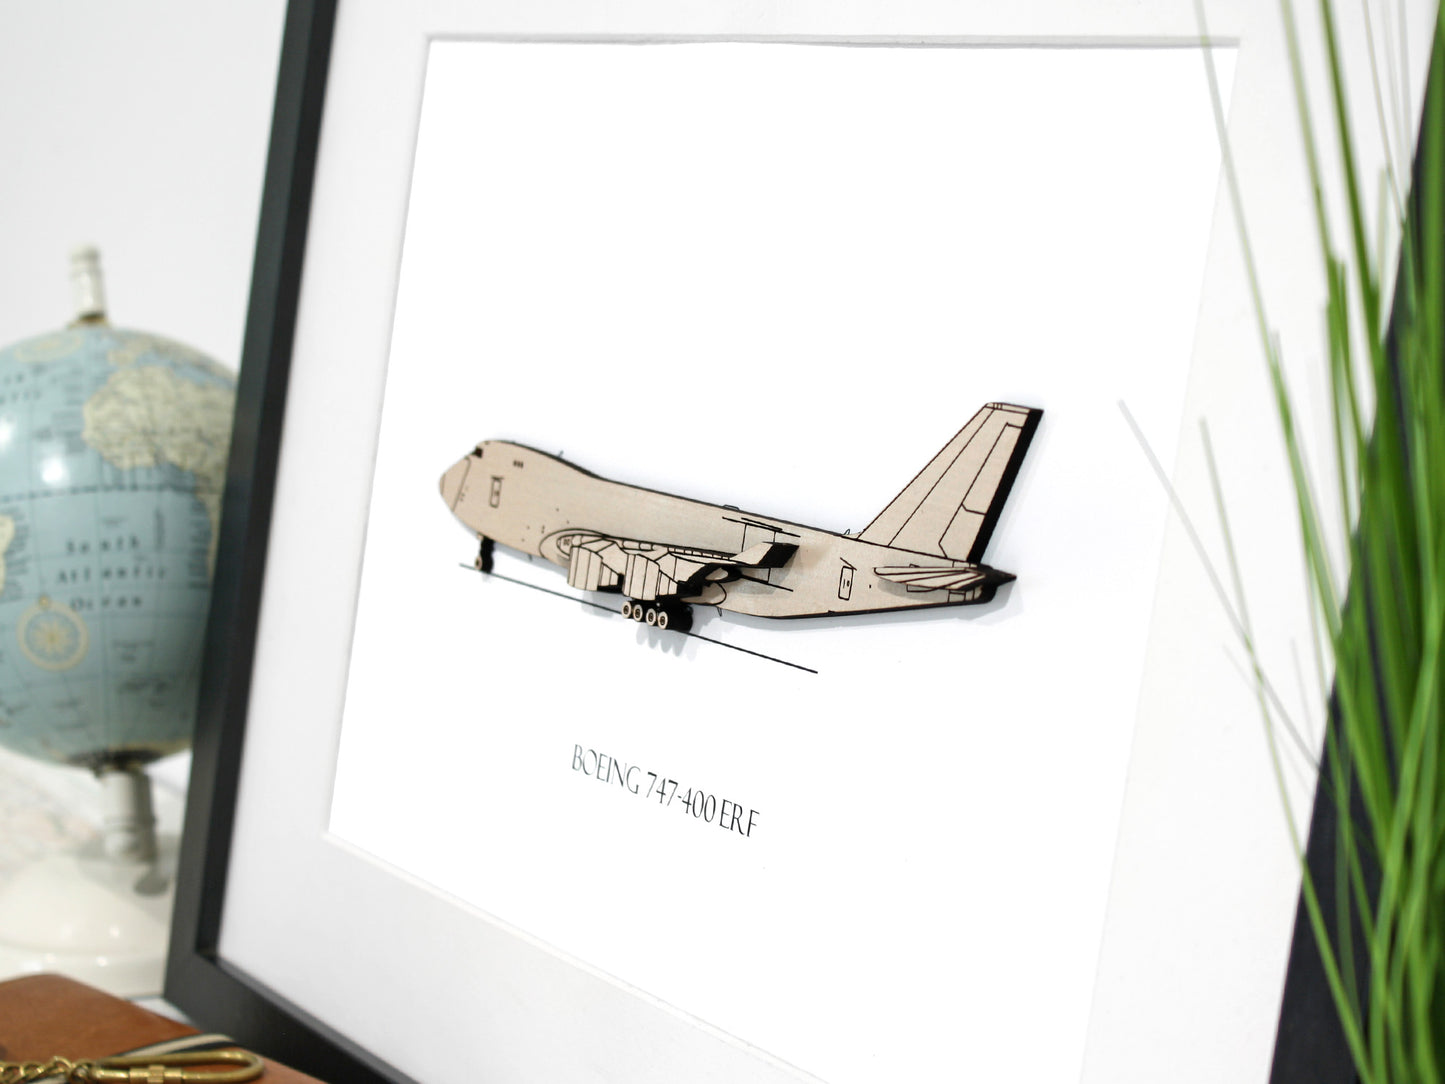 Boeing 747-400 ERF aviation gifts